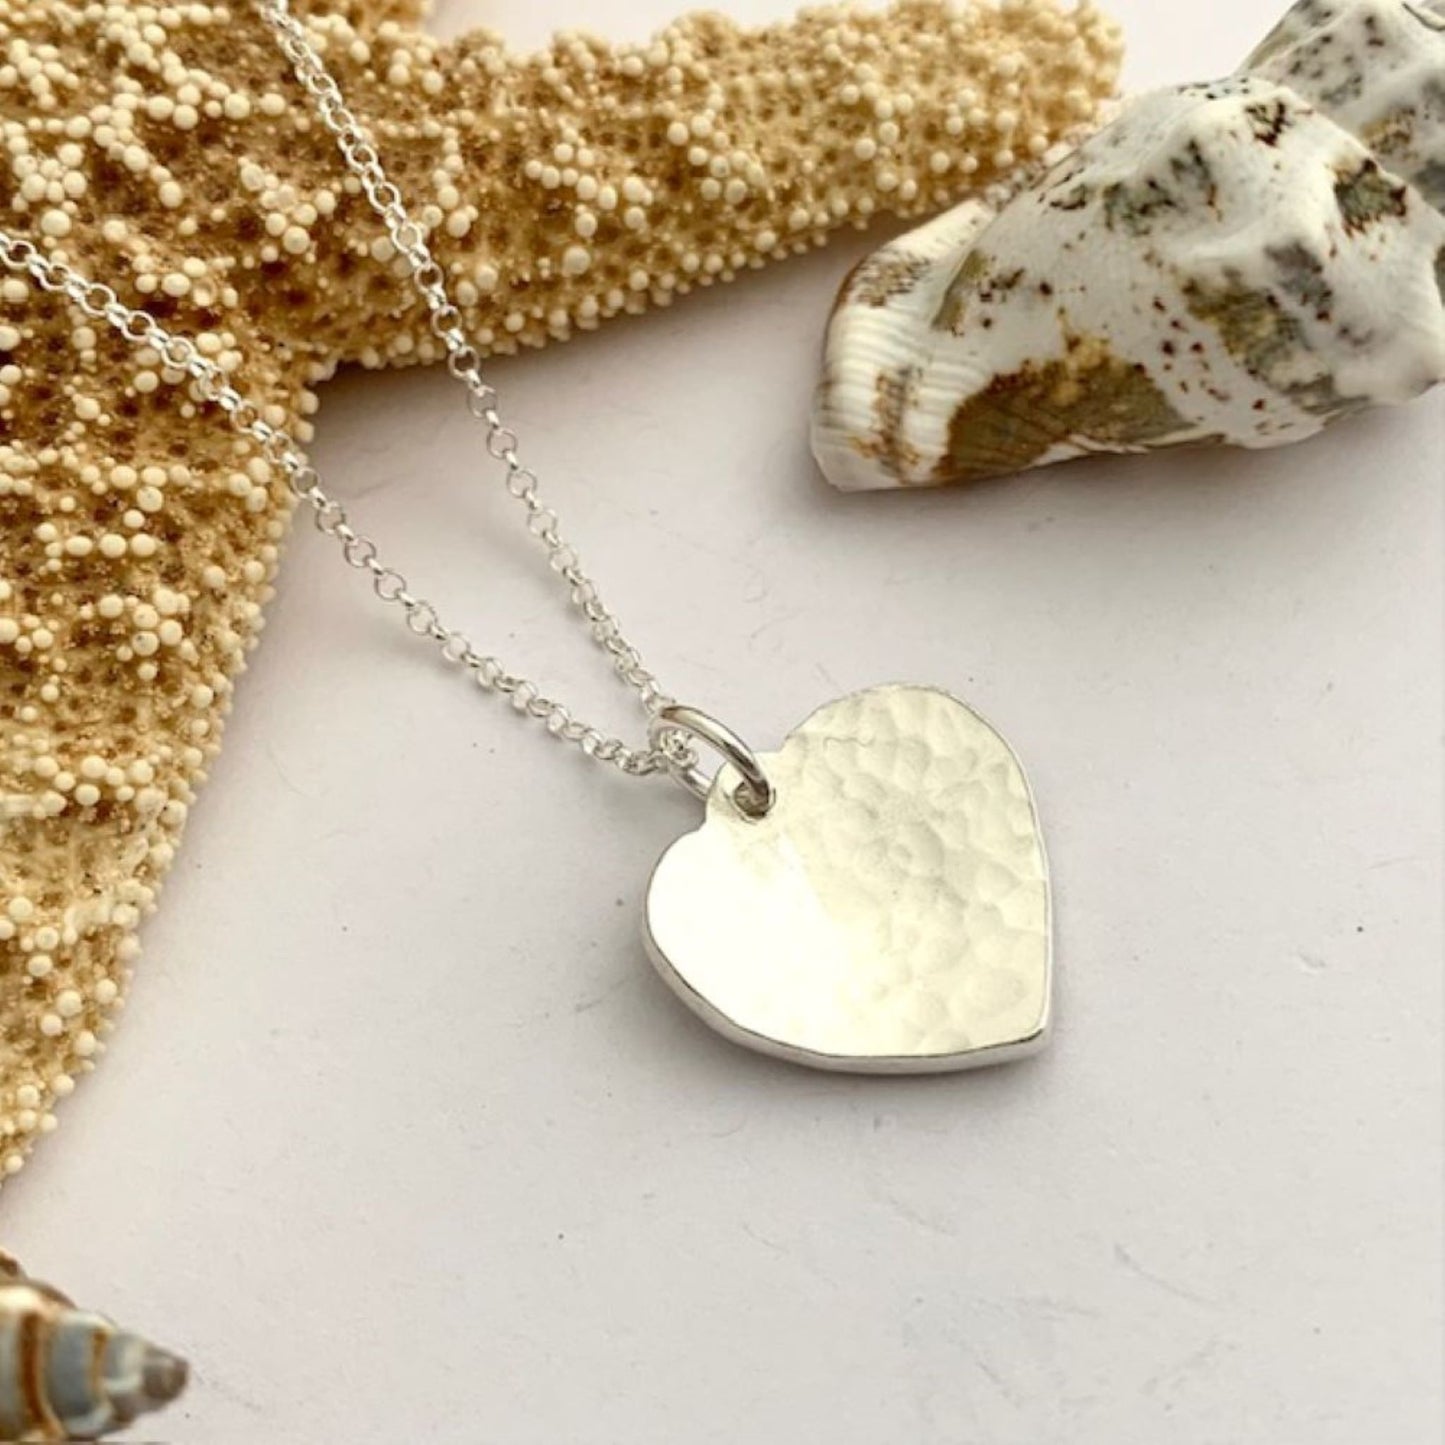 Dimpled 925 Sterling Silver Heart Necklace